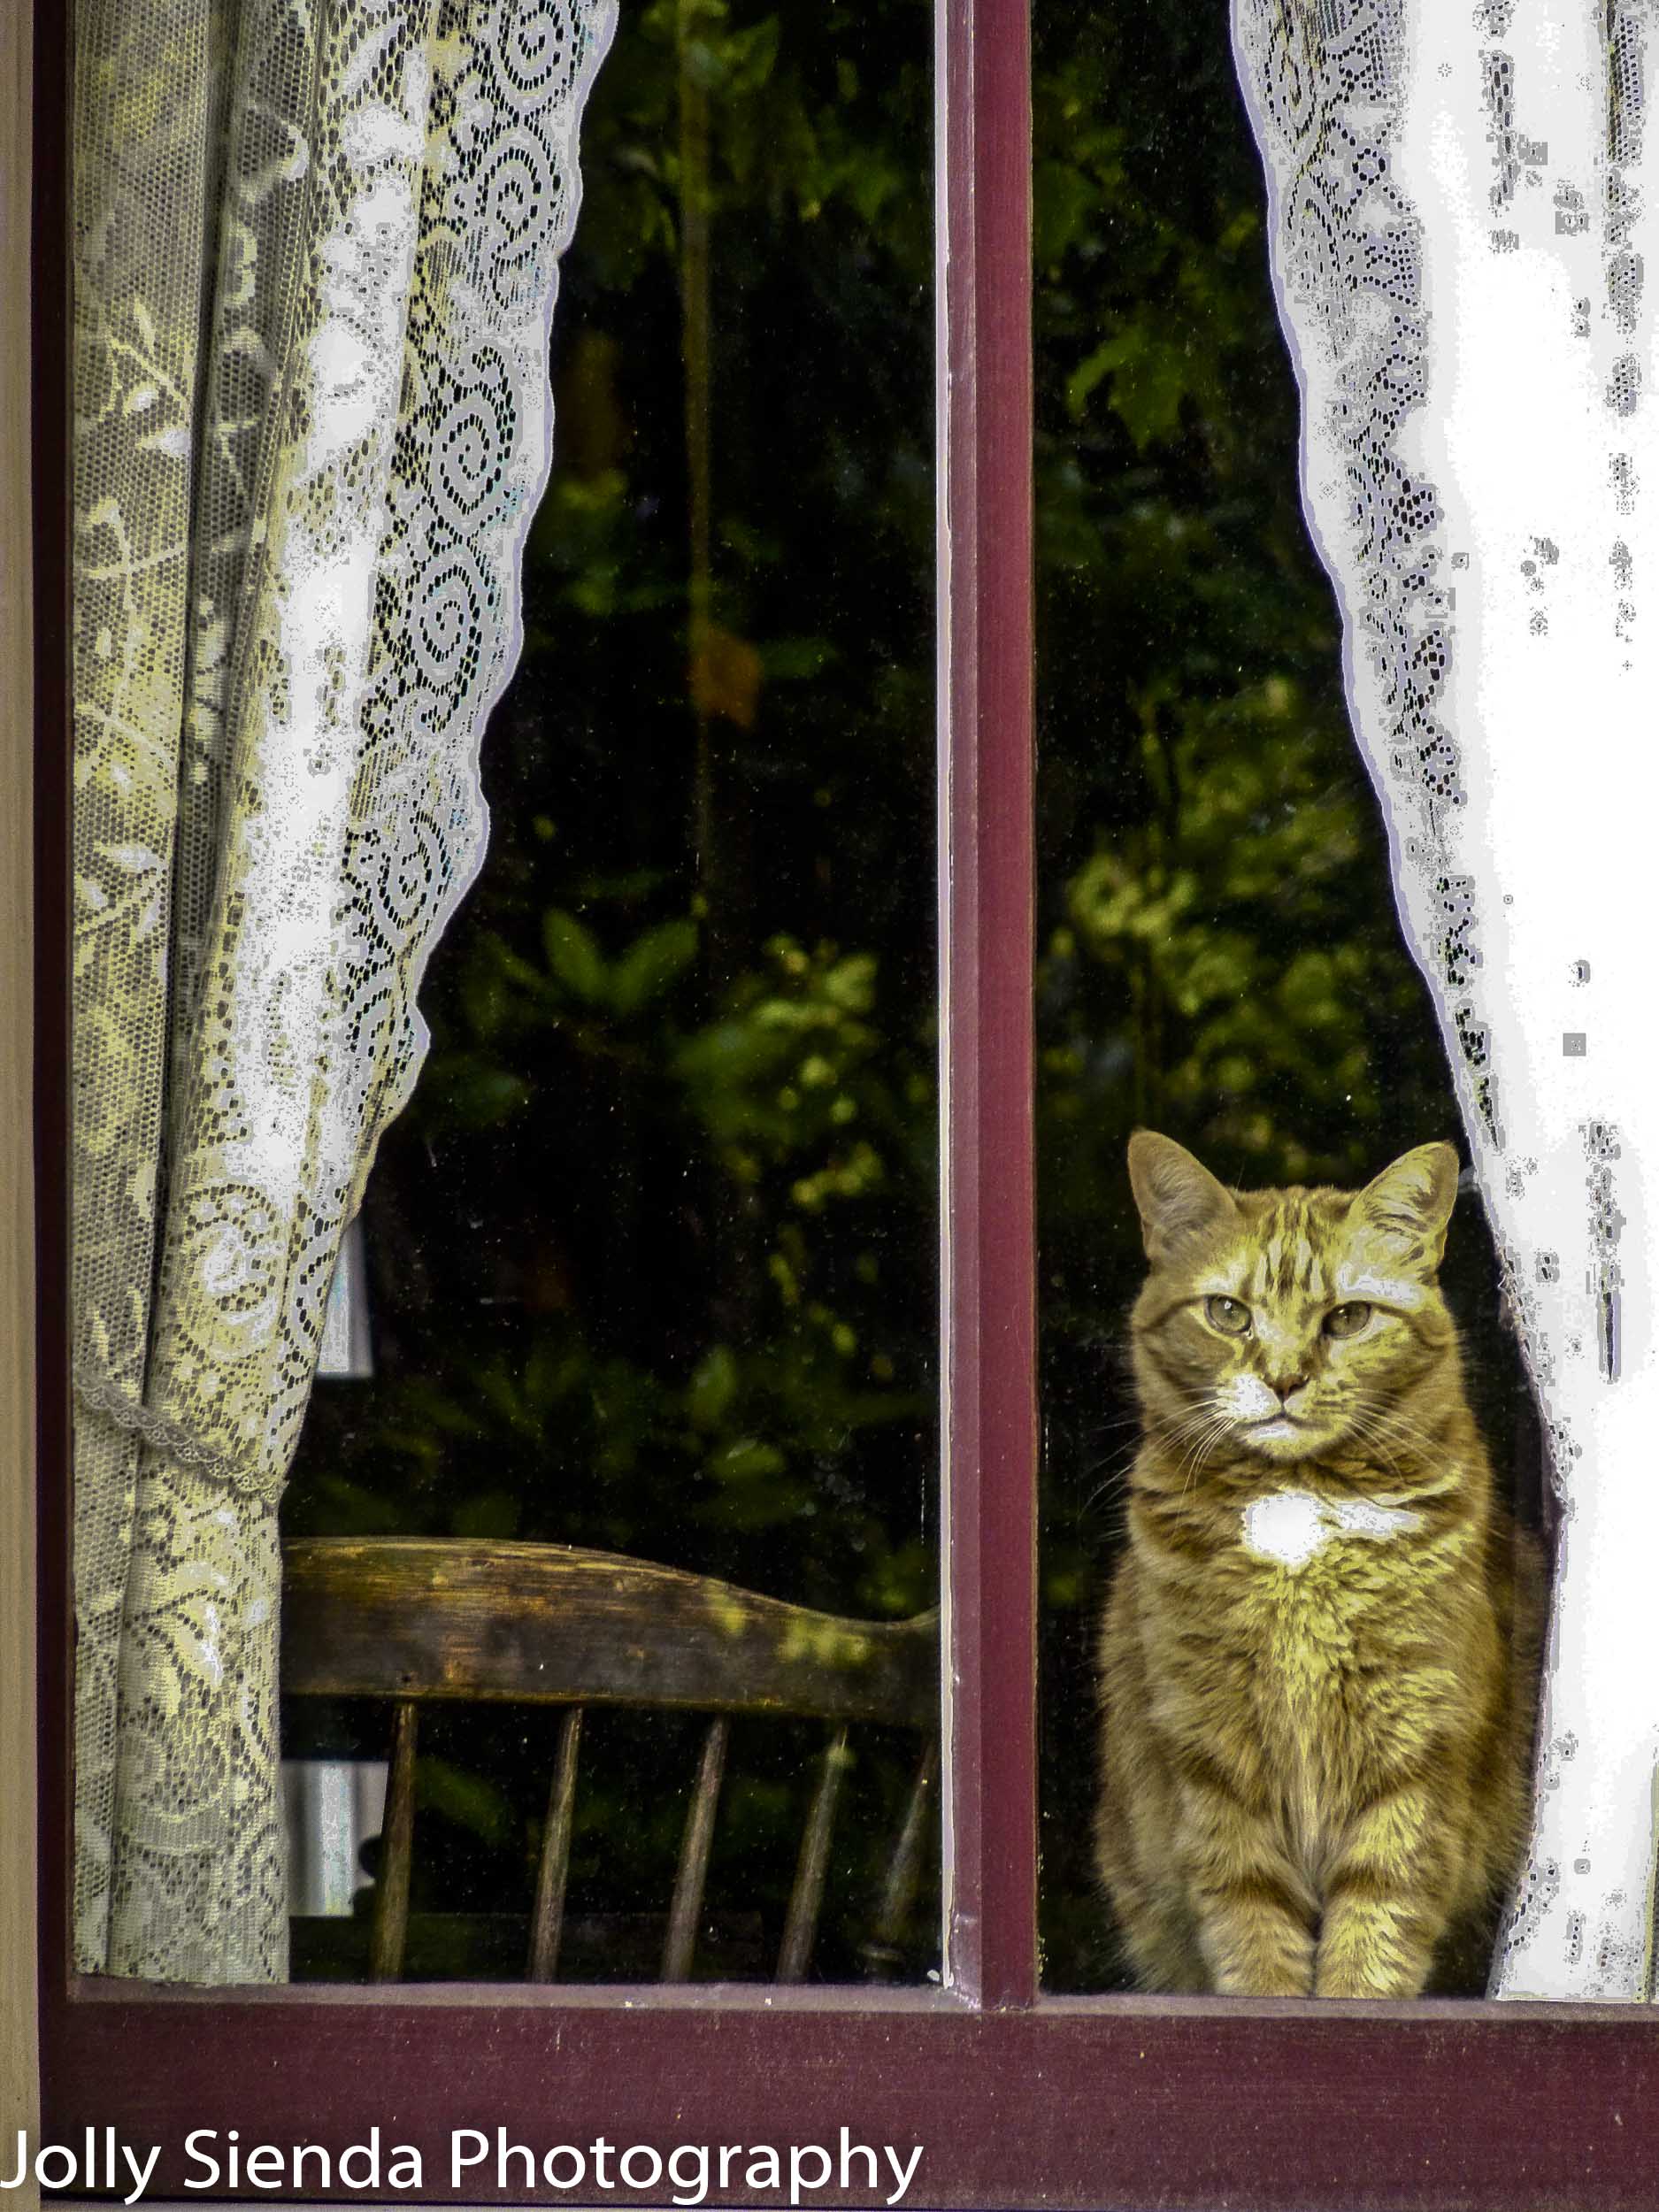 Orange Tabby Cat Looks out the Window Through Lace Curtains